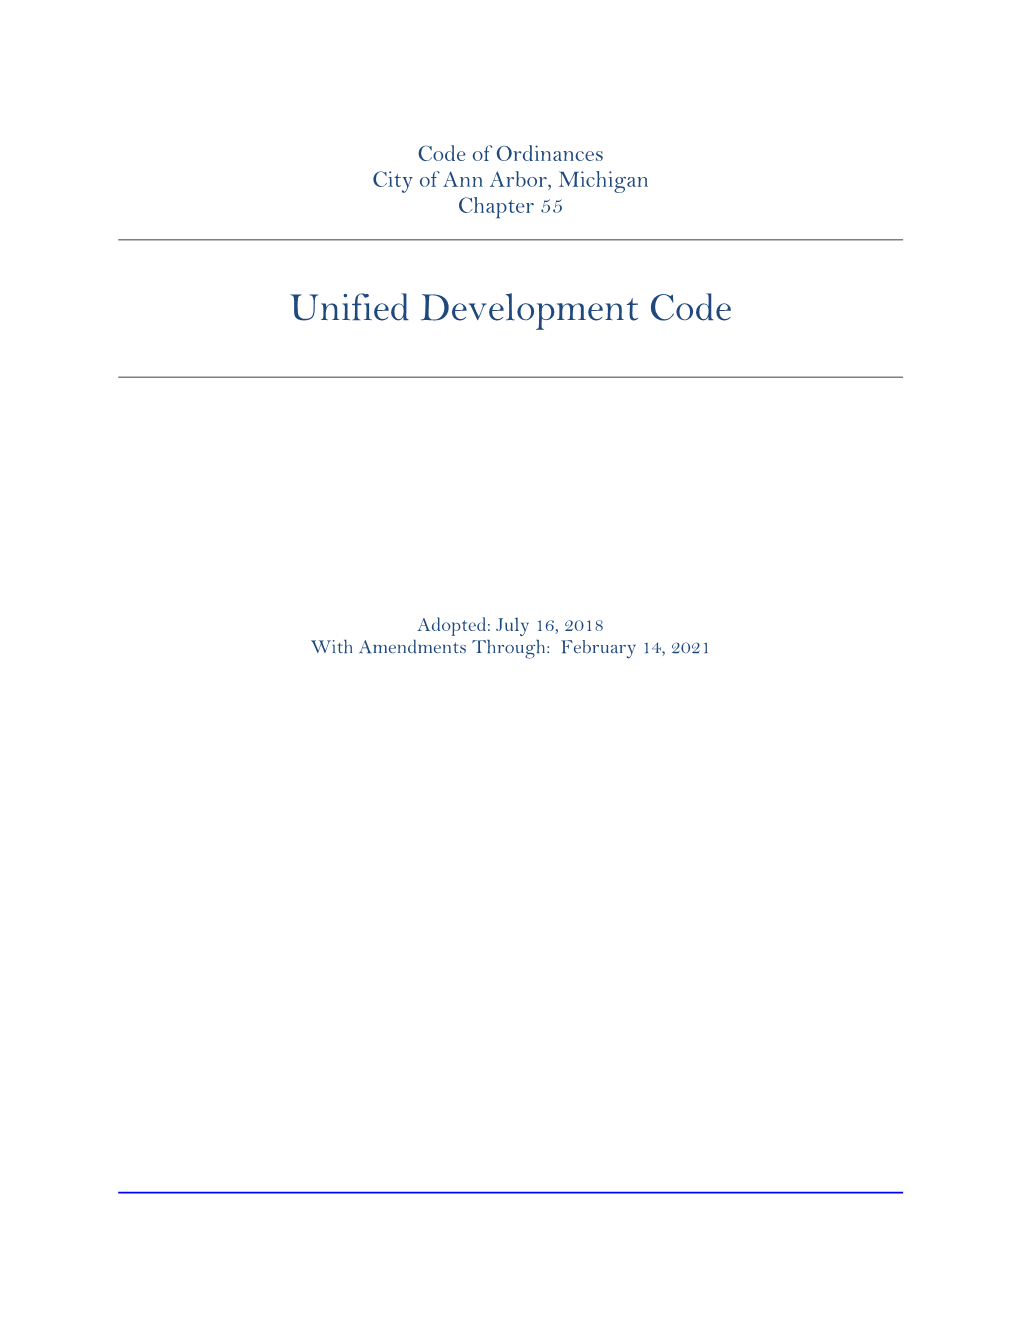 Chapter 55 Unified Development Code